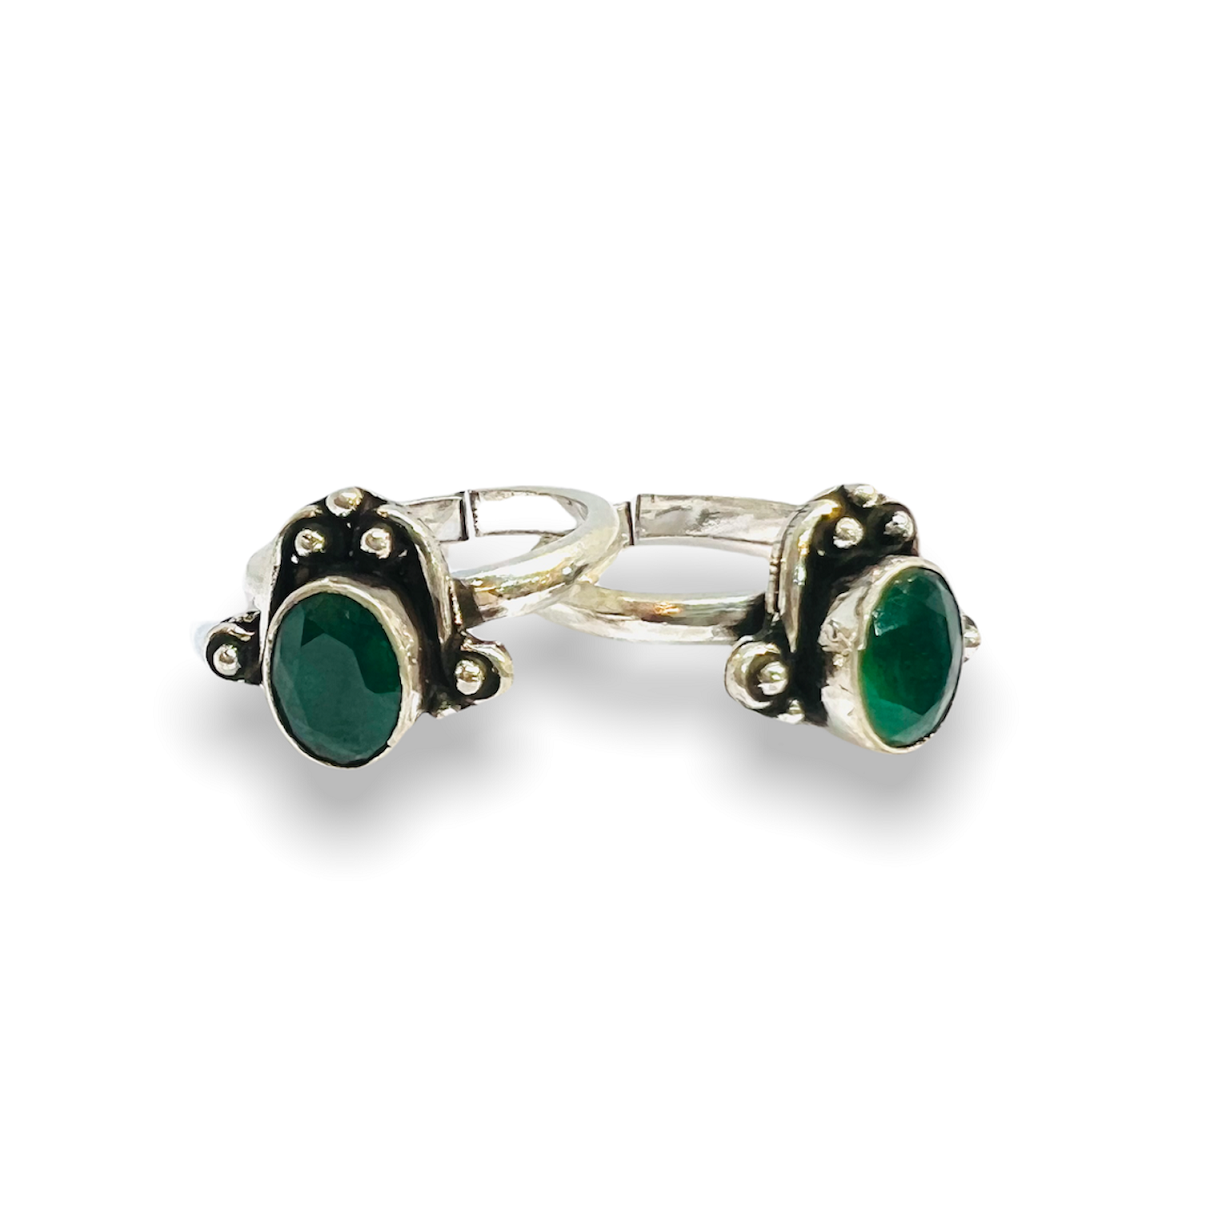 Buy Emerald Stone Toe Ring Online in India - SILVER SIDDHI .